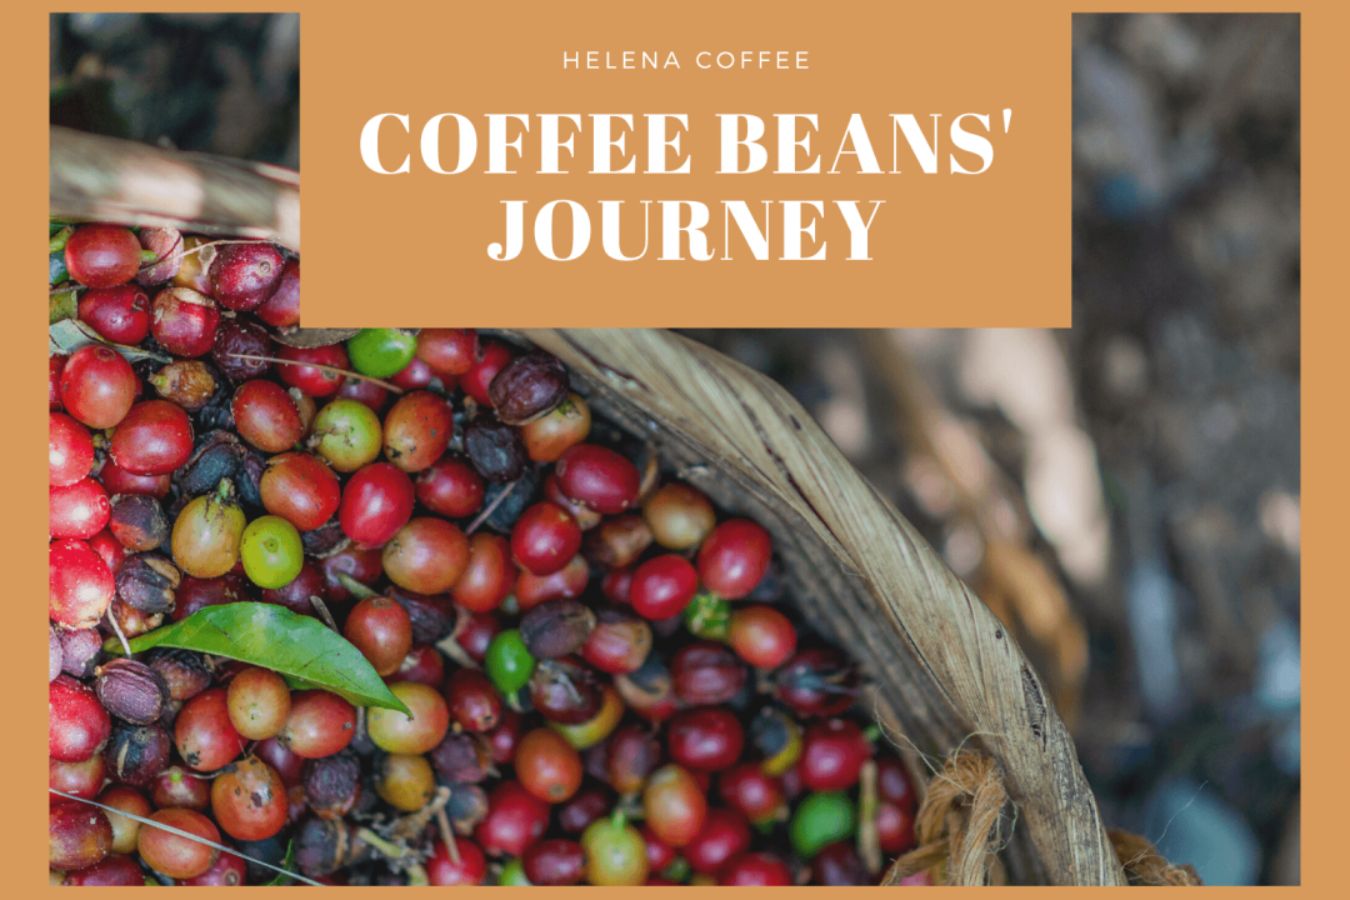 Vietnam Coffee How To Make: Coffee Beans' Journey